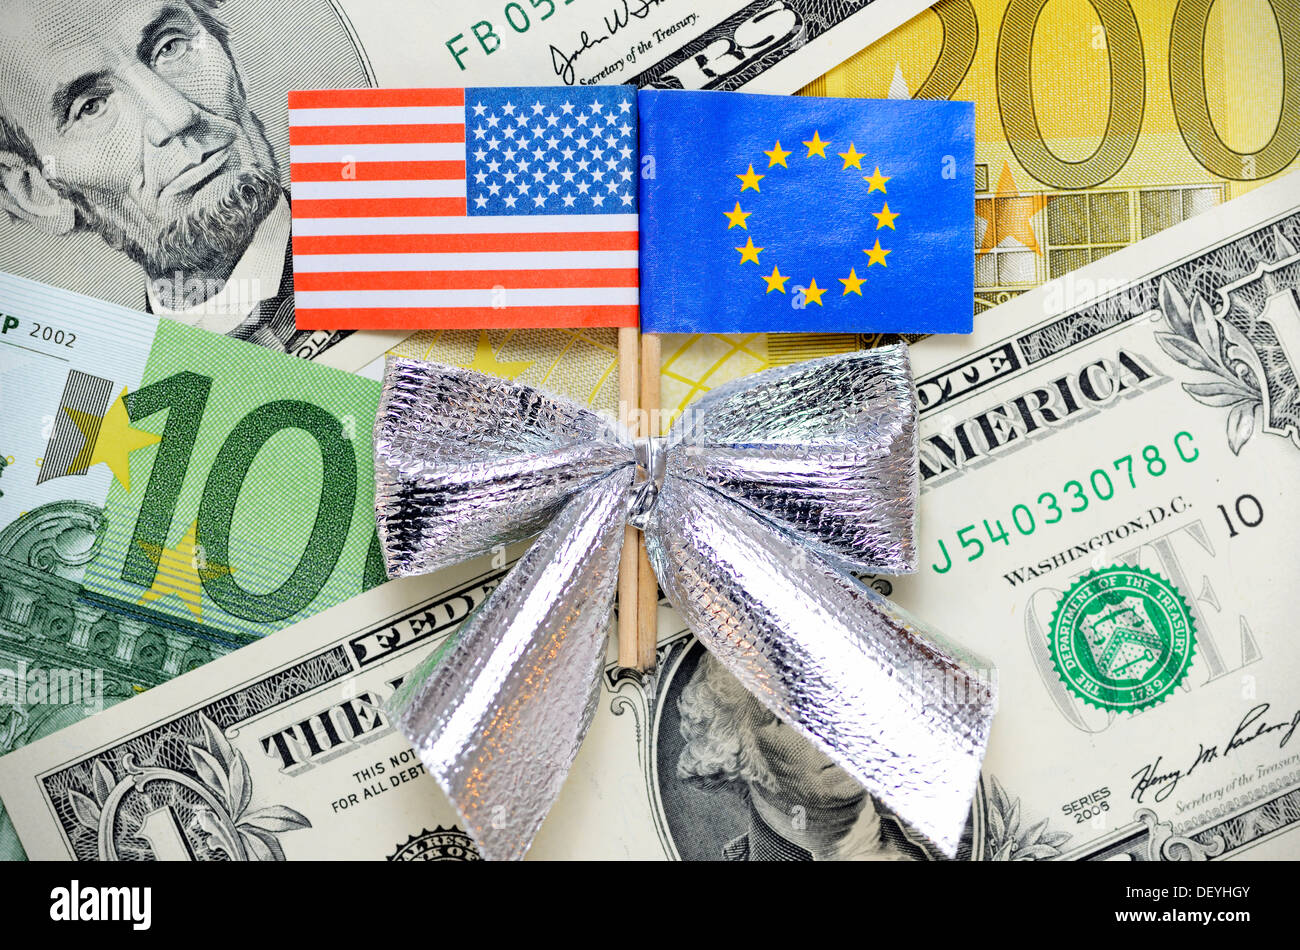 Flag of the USA and the EU with gift loop on dollar marks and euronotes, symbolic photo foreign trade zone between the USA and t Stock Photo